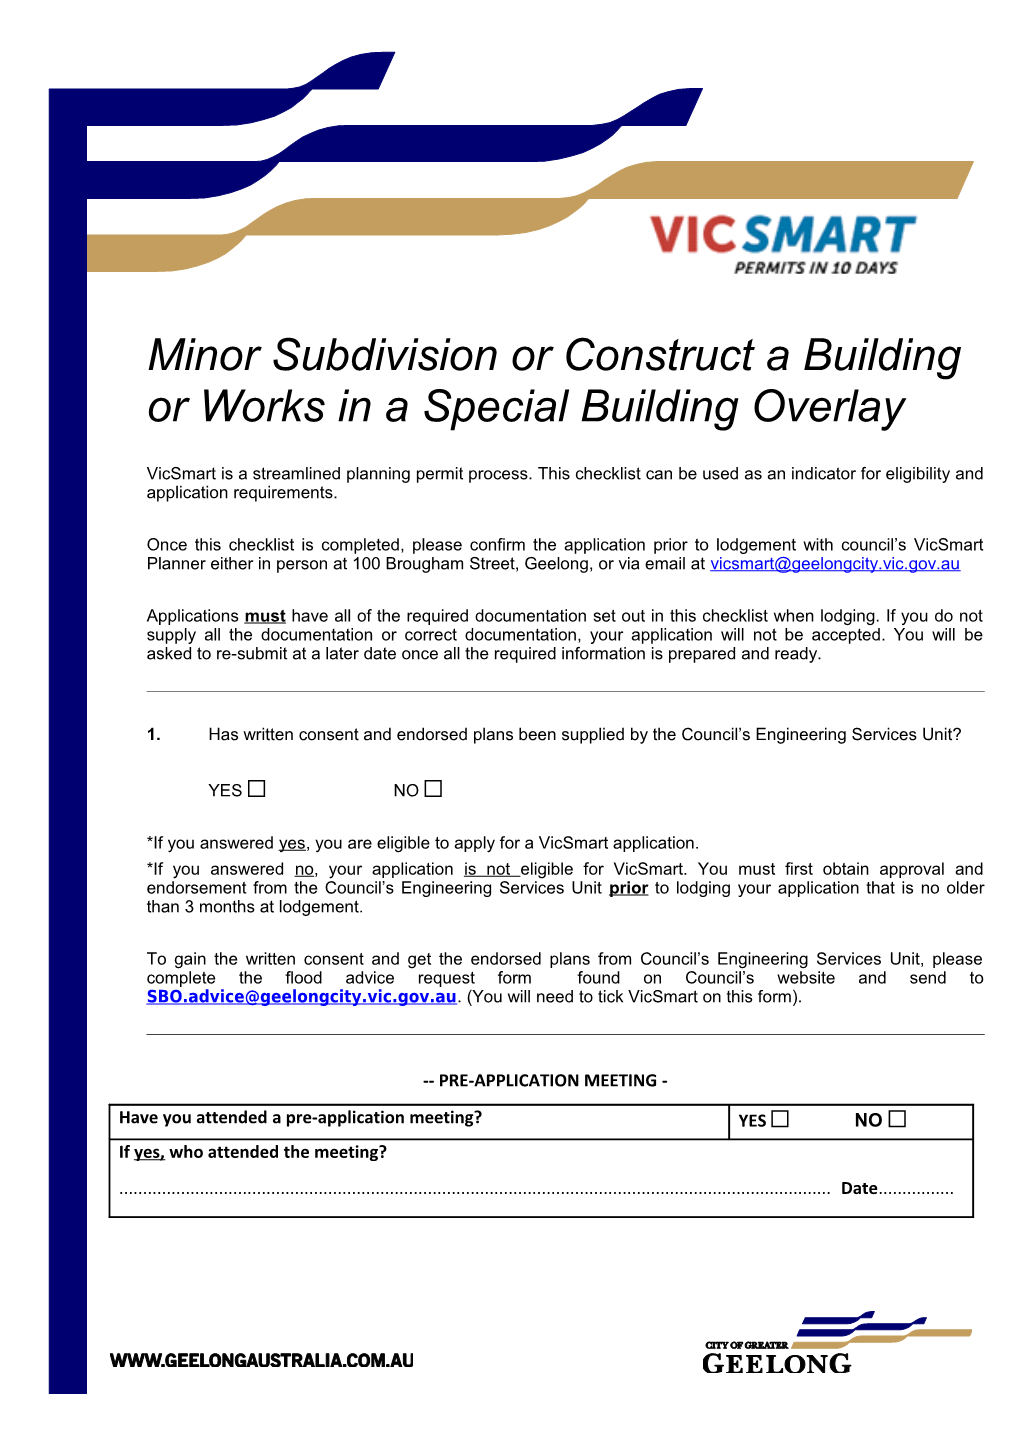 Minor Subdivision Or Construct a Building Or Works in a Special Building Overlay